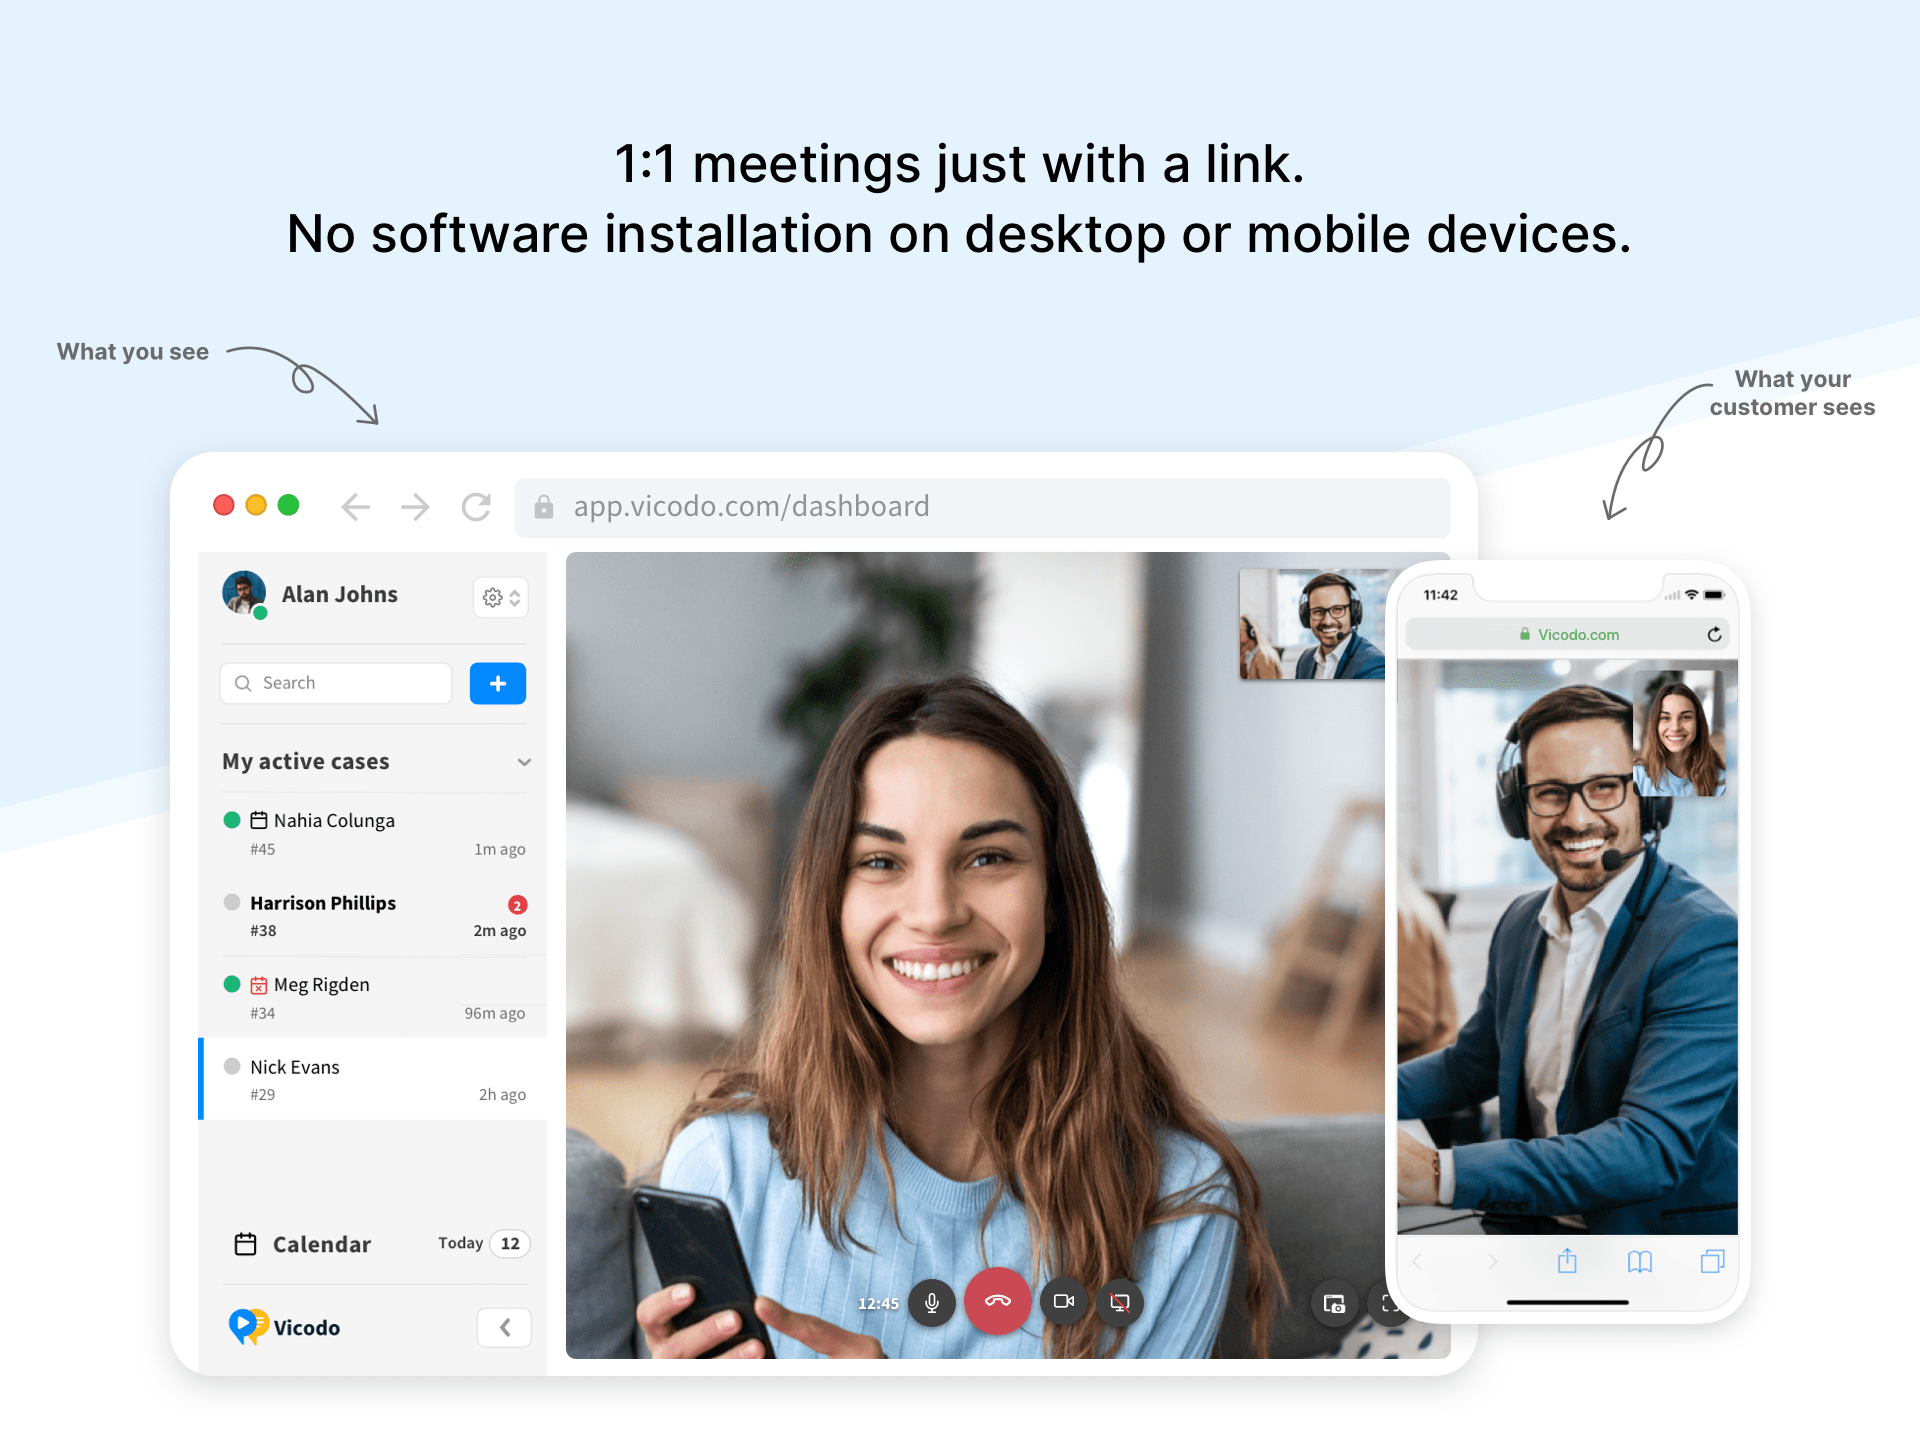 Customers start video meetings without having to install or register. Invitations are delivered via personalized SMS or email. After clicking on the invite, the customer joins a meeting using a browser.